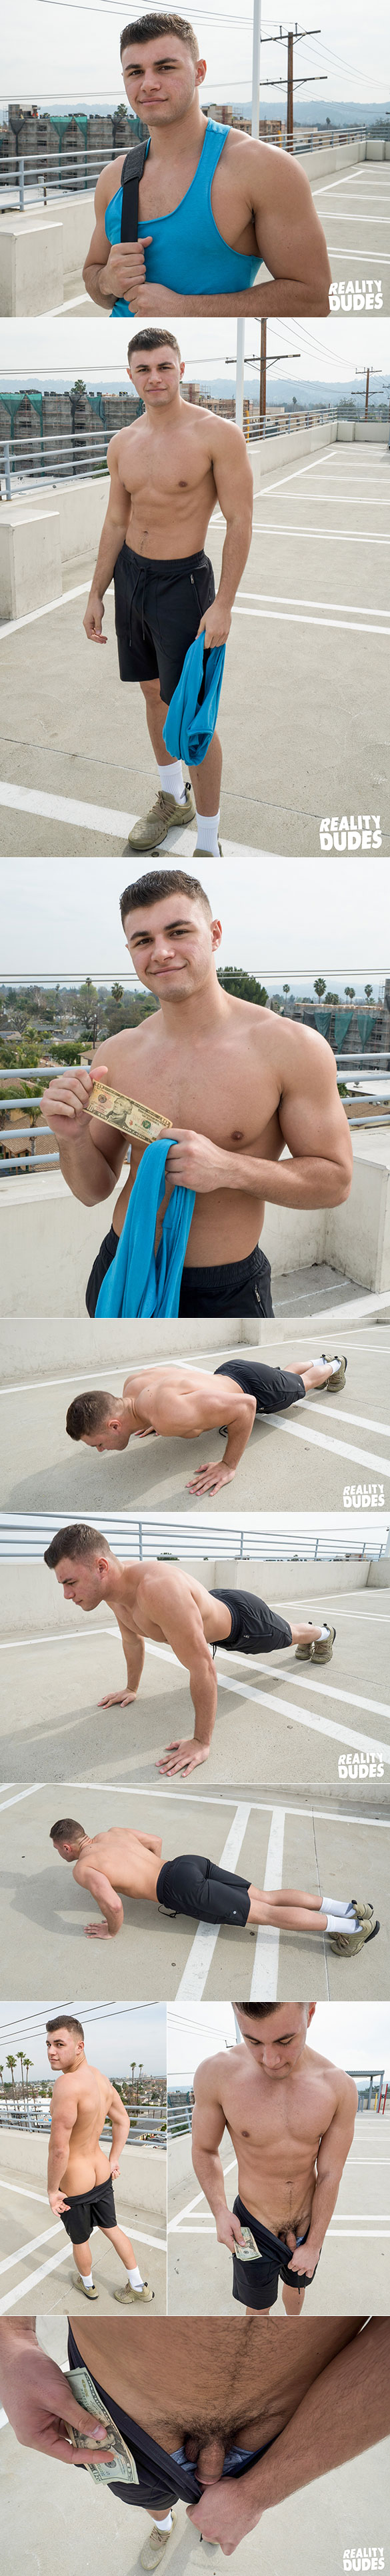 Reality Dudes: Robert bottoms for cash